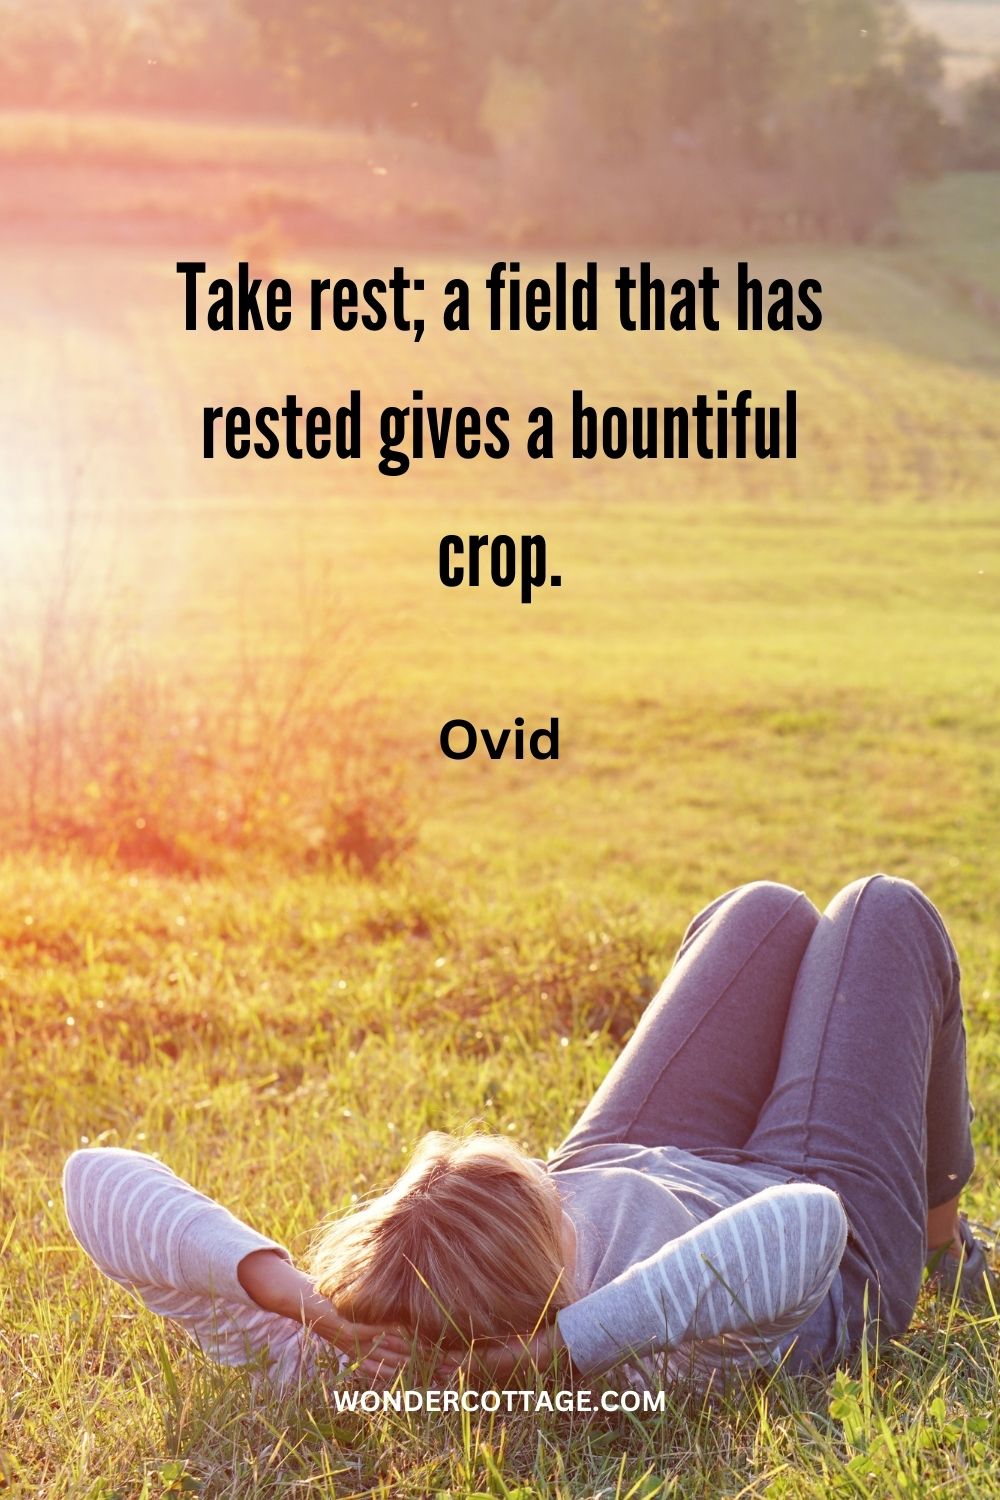 Take rest; a field that has rested gives a bountiful crop. Ovid